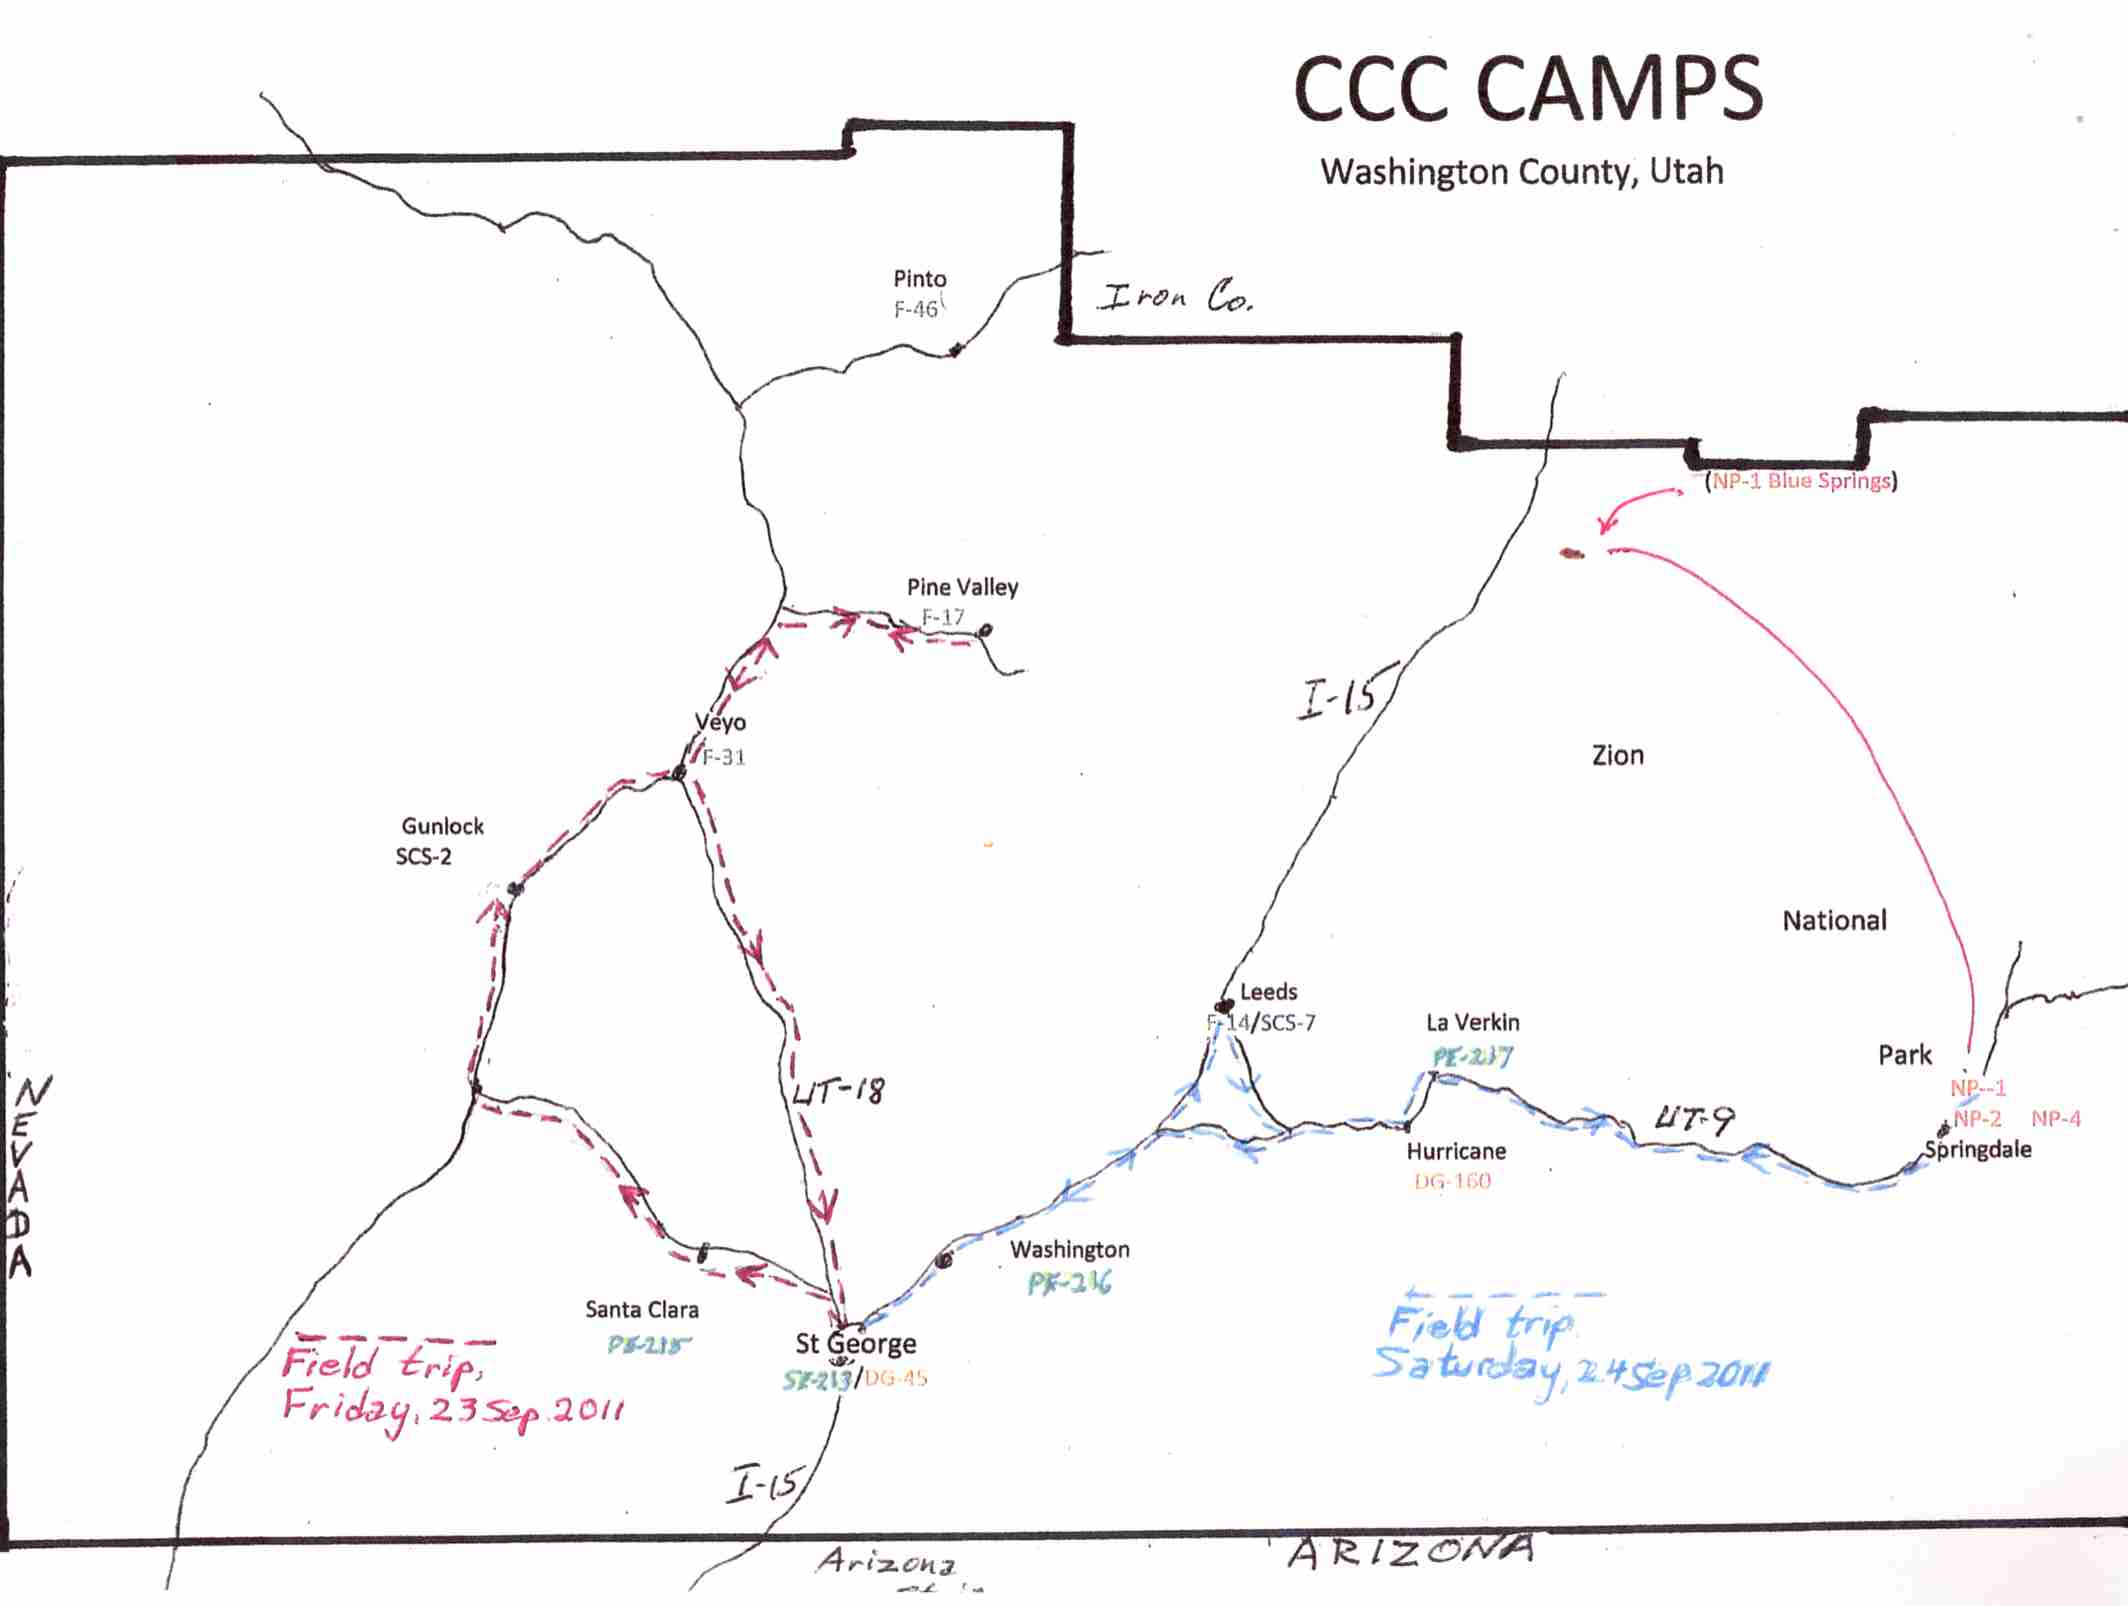 28 Ccc Camp Locations Map Maps Database Source 19320 | Hot Sex Picture